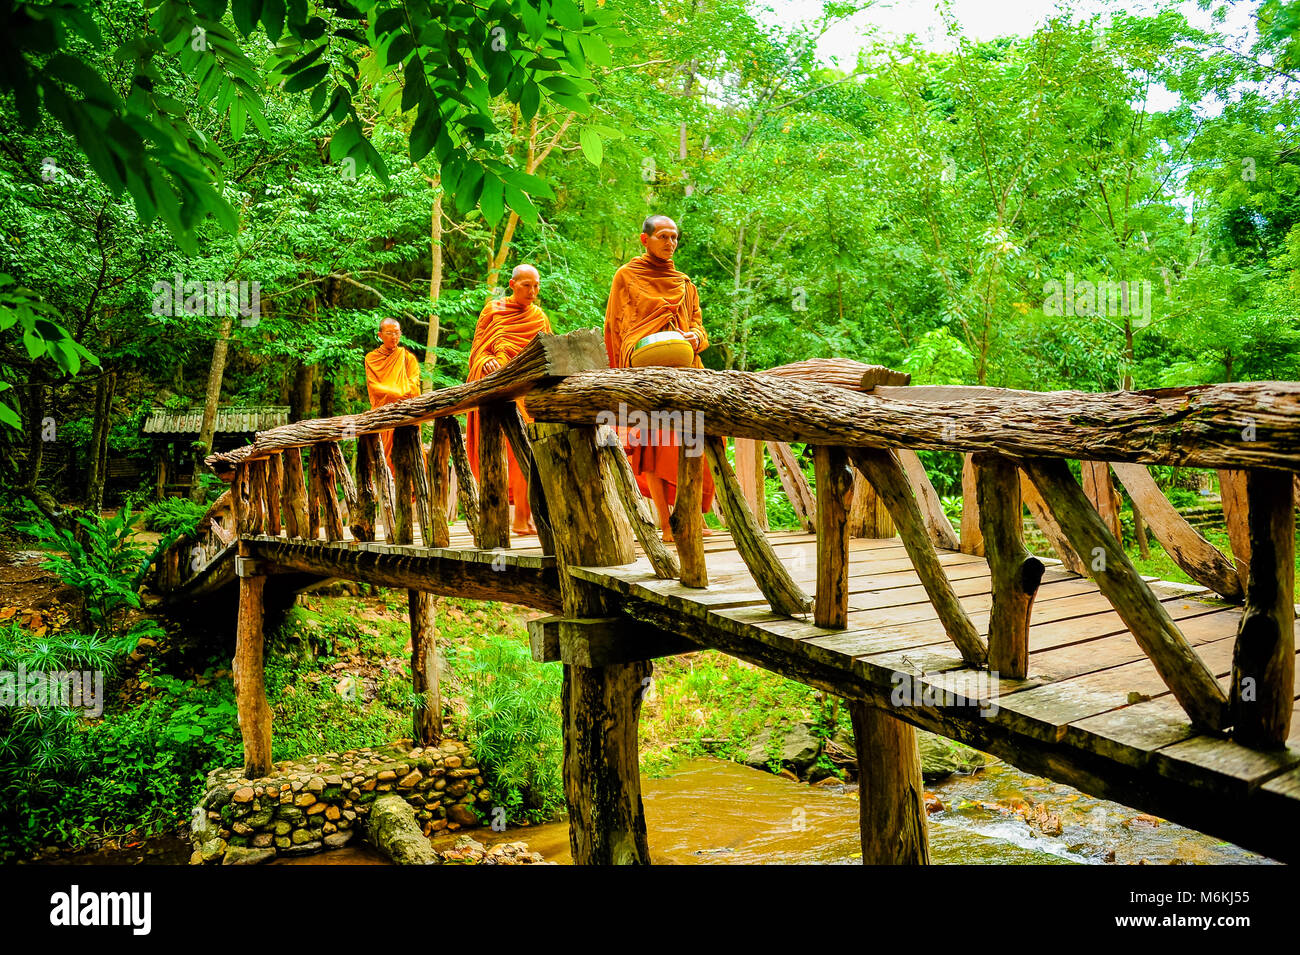 Kanchanaburi, Thailand - July 14, 2012: Buddhist monks marching on wooden bridge to seek alms in morning. This is usual every day duty of Buddhist mon Stock Photo